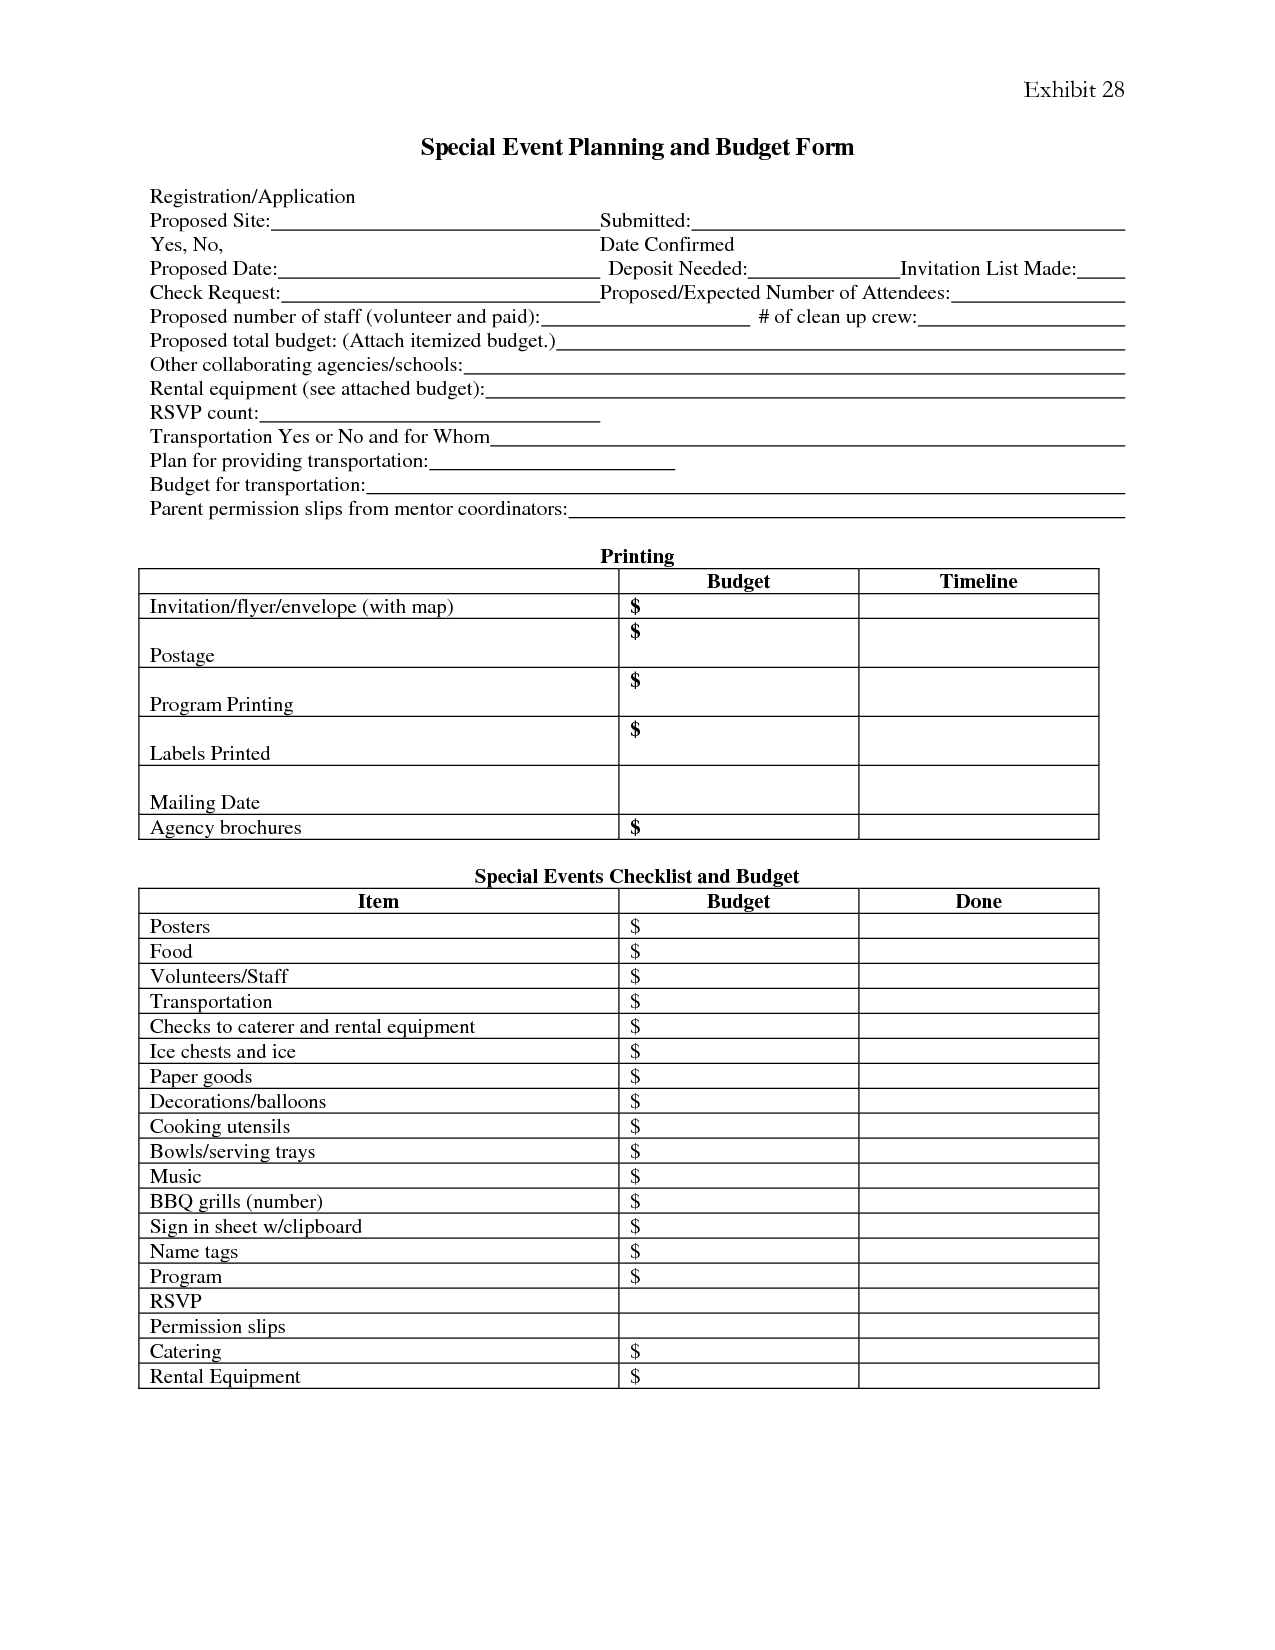 7 Best Images of Event Planning Forms Free Printable ...